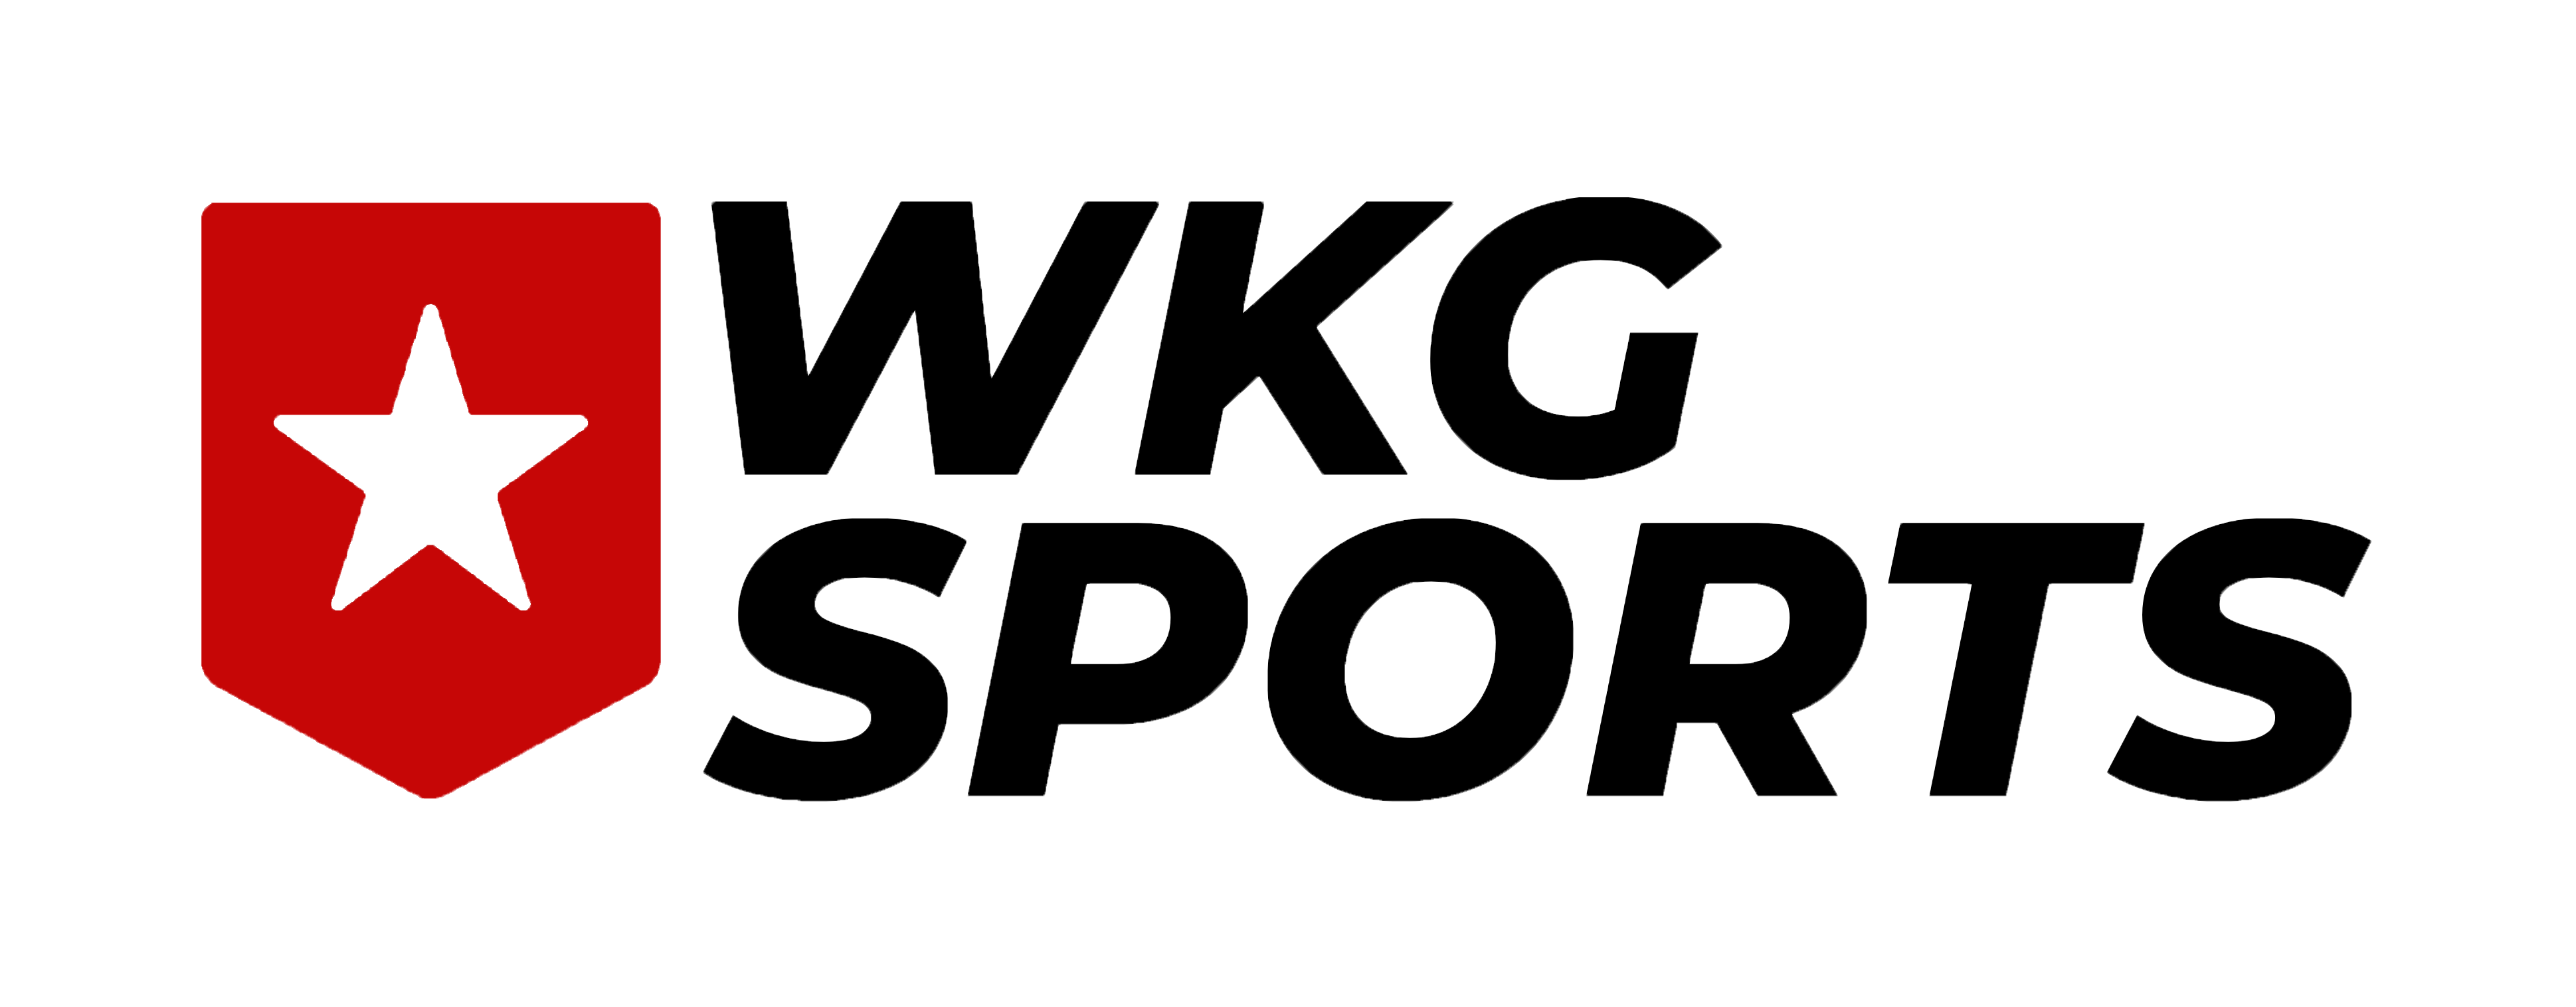 WKG Sports - Home and Commercial Fitness Equipment